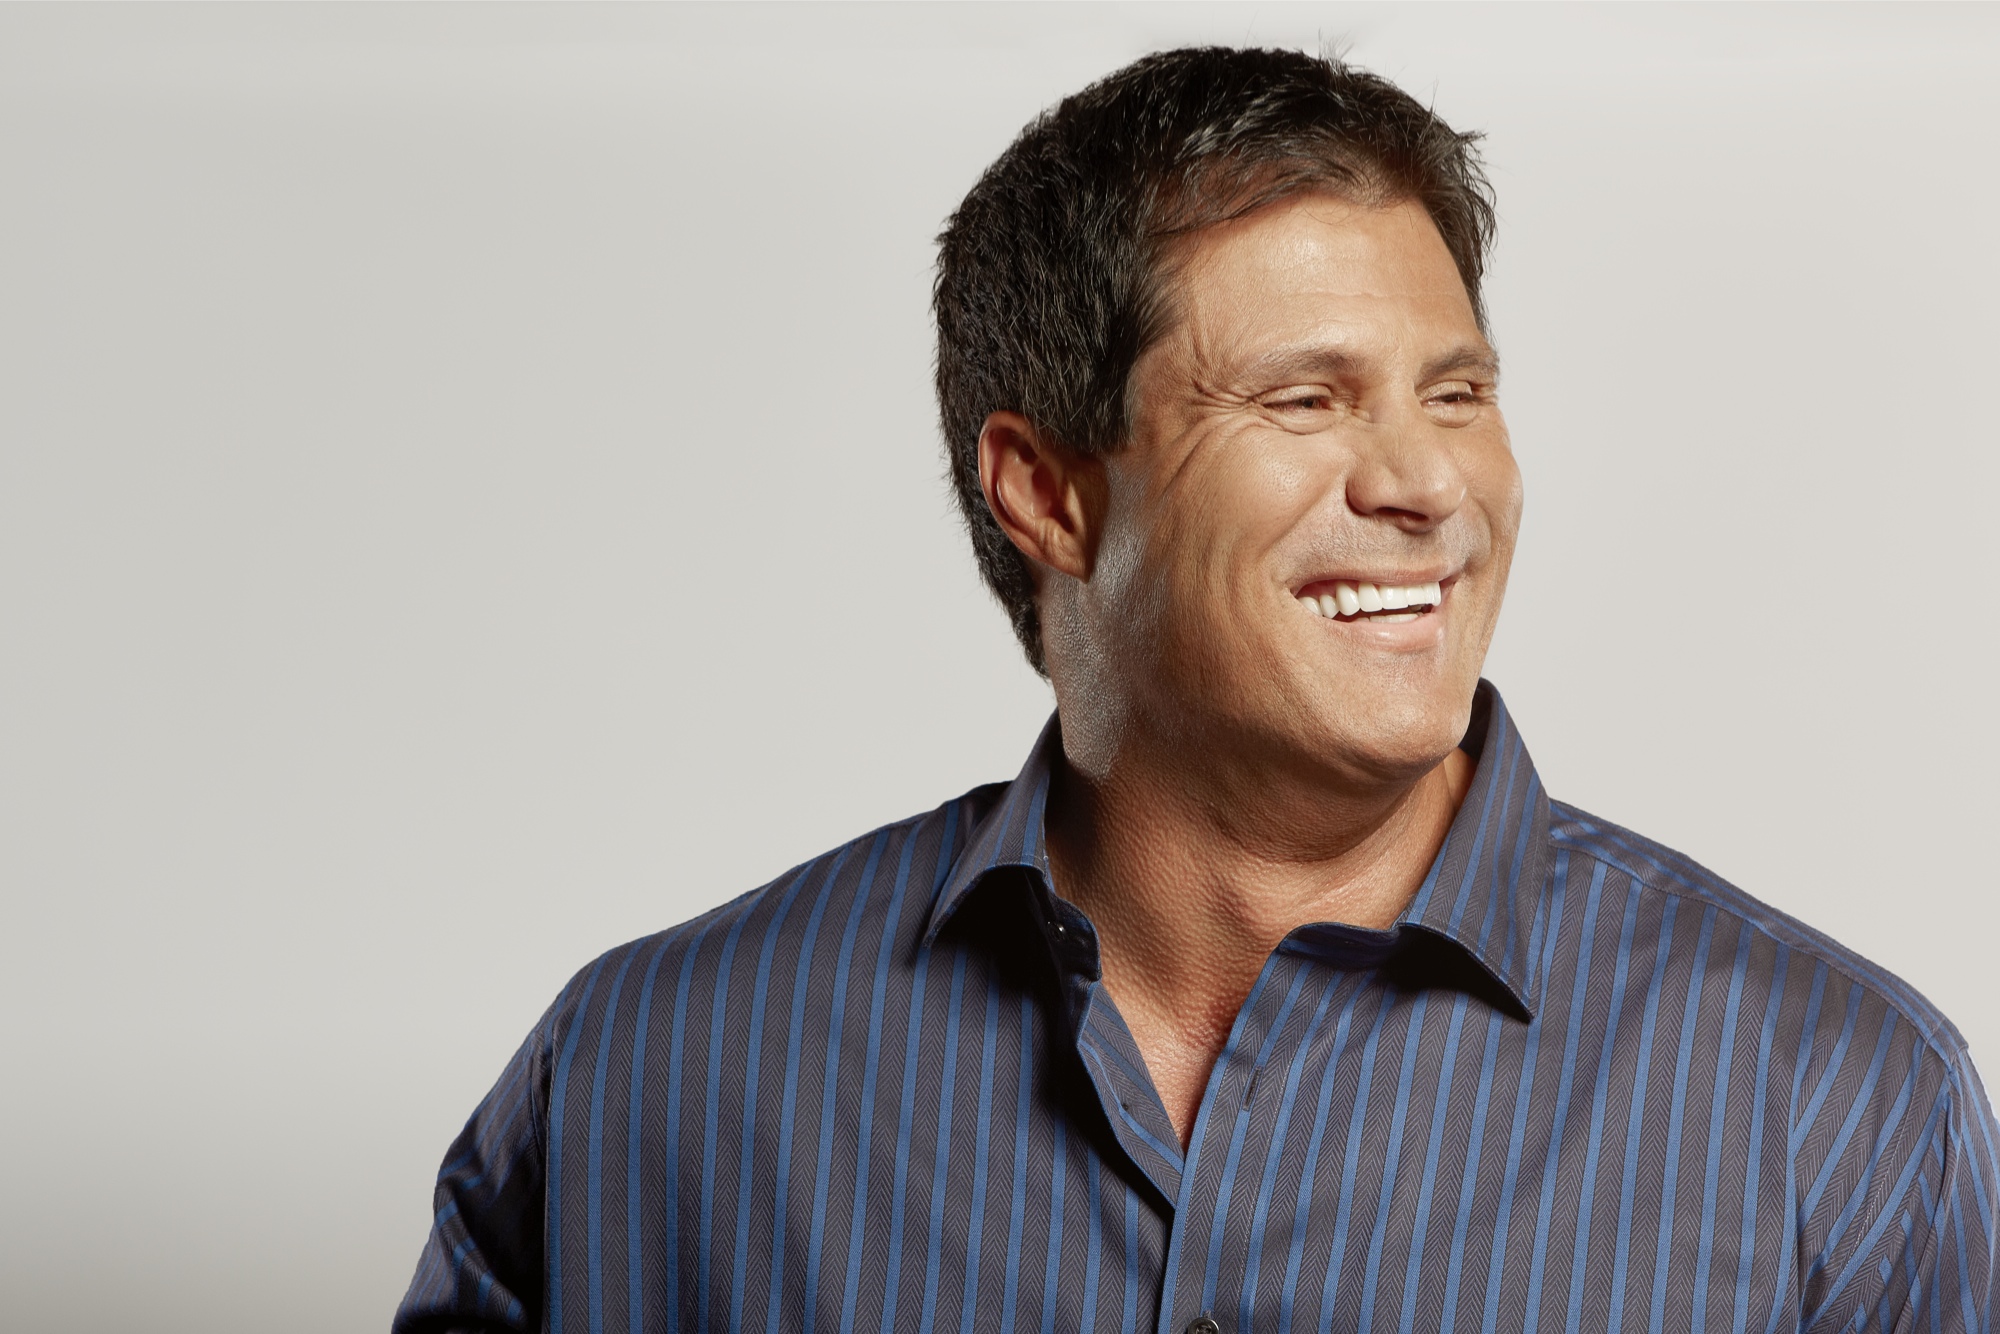 Jose Canseco Light